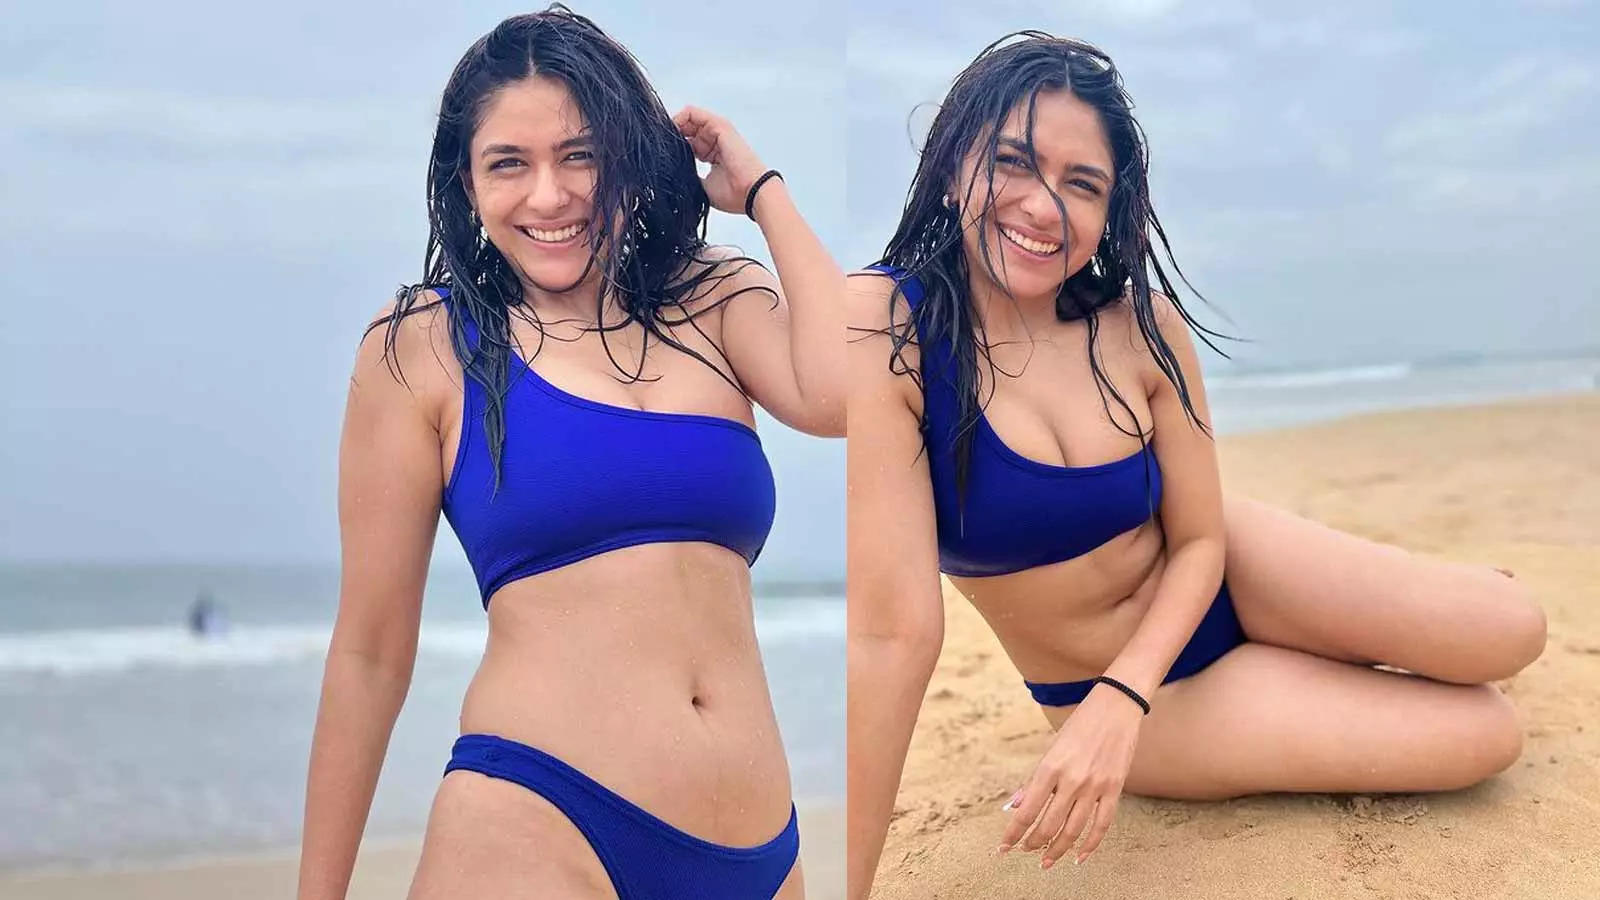 Mrunal Thakur Bikini Photo, Images, Pictures, Video Mrunal Thakur shares bikini photos from her beach vacation; fans say This is not our Sita  image image